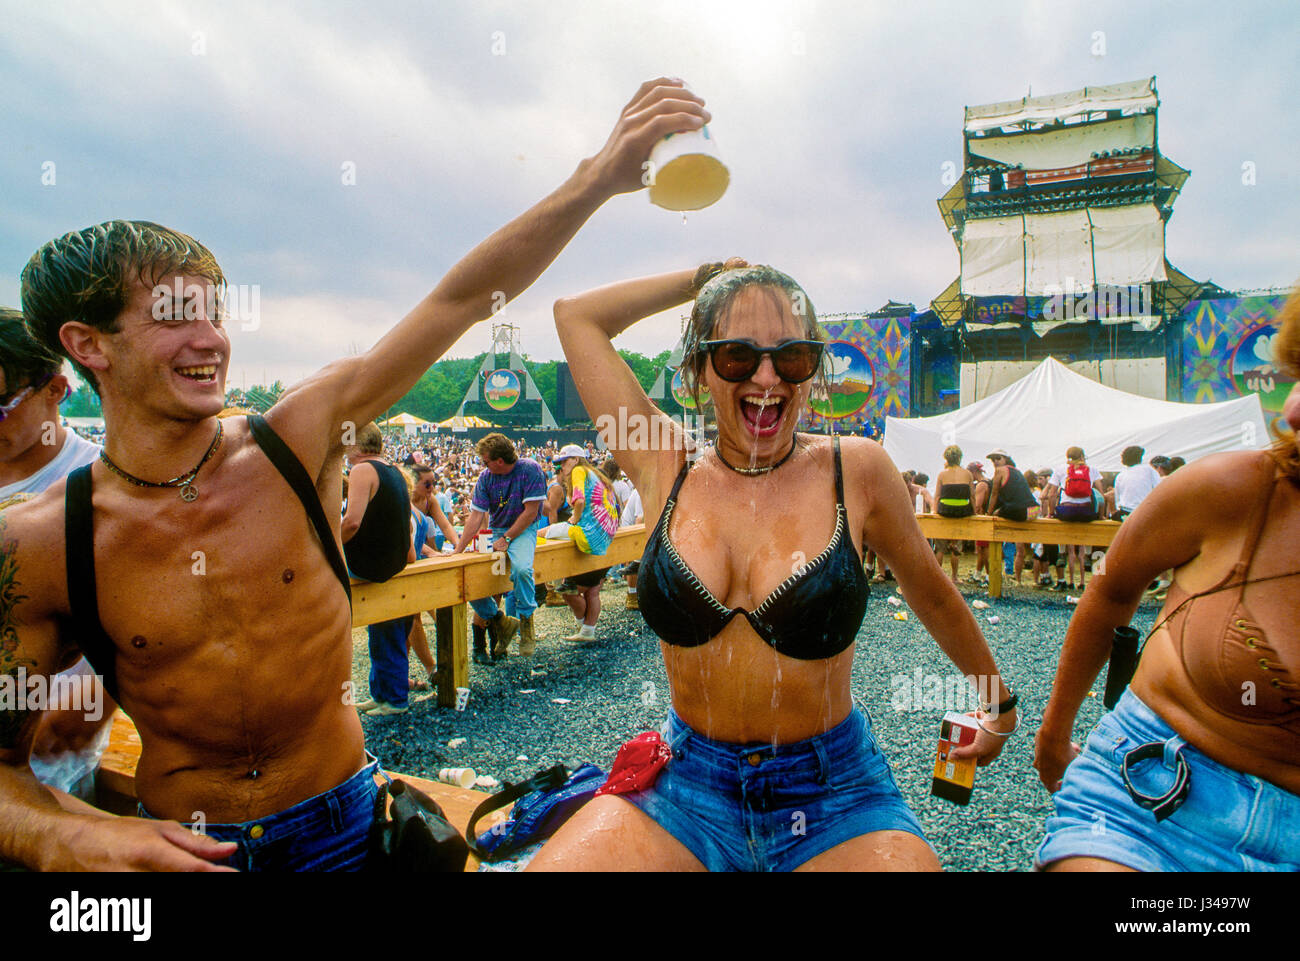 Woman concert goer gets a cup of water poured over her head in an effort to keep cool while attending the 25th anniversary of the orginal Woodstock music festival which took place on the WInston Farm in Saugerties New York, August 12, 1994.  Photo by Mark Reinstein Stock Photo